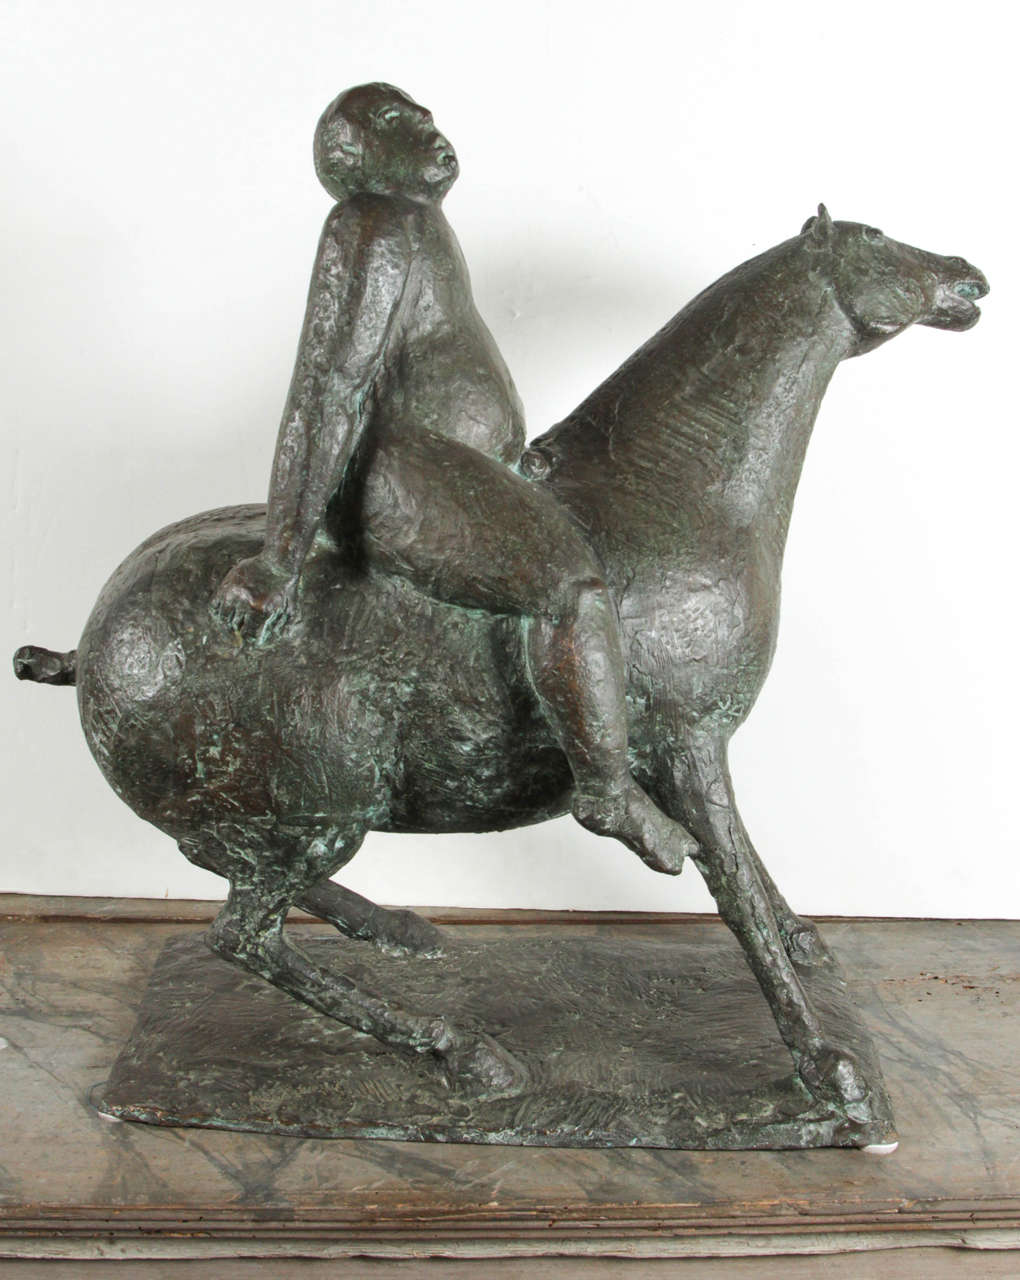 Original, hand-cast, signed, bronze sculpture of a horse and rider by Tuscan artist, Ivano Vecoli.